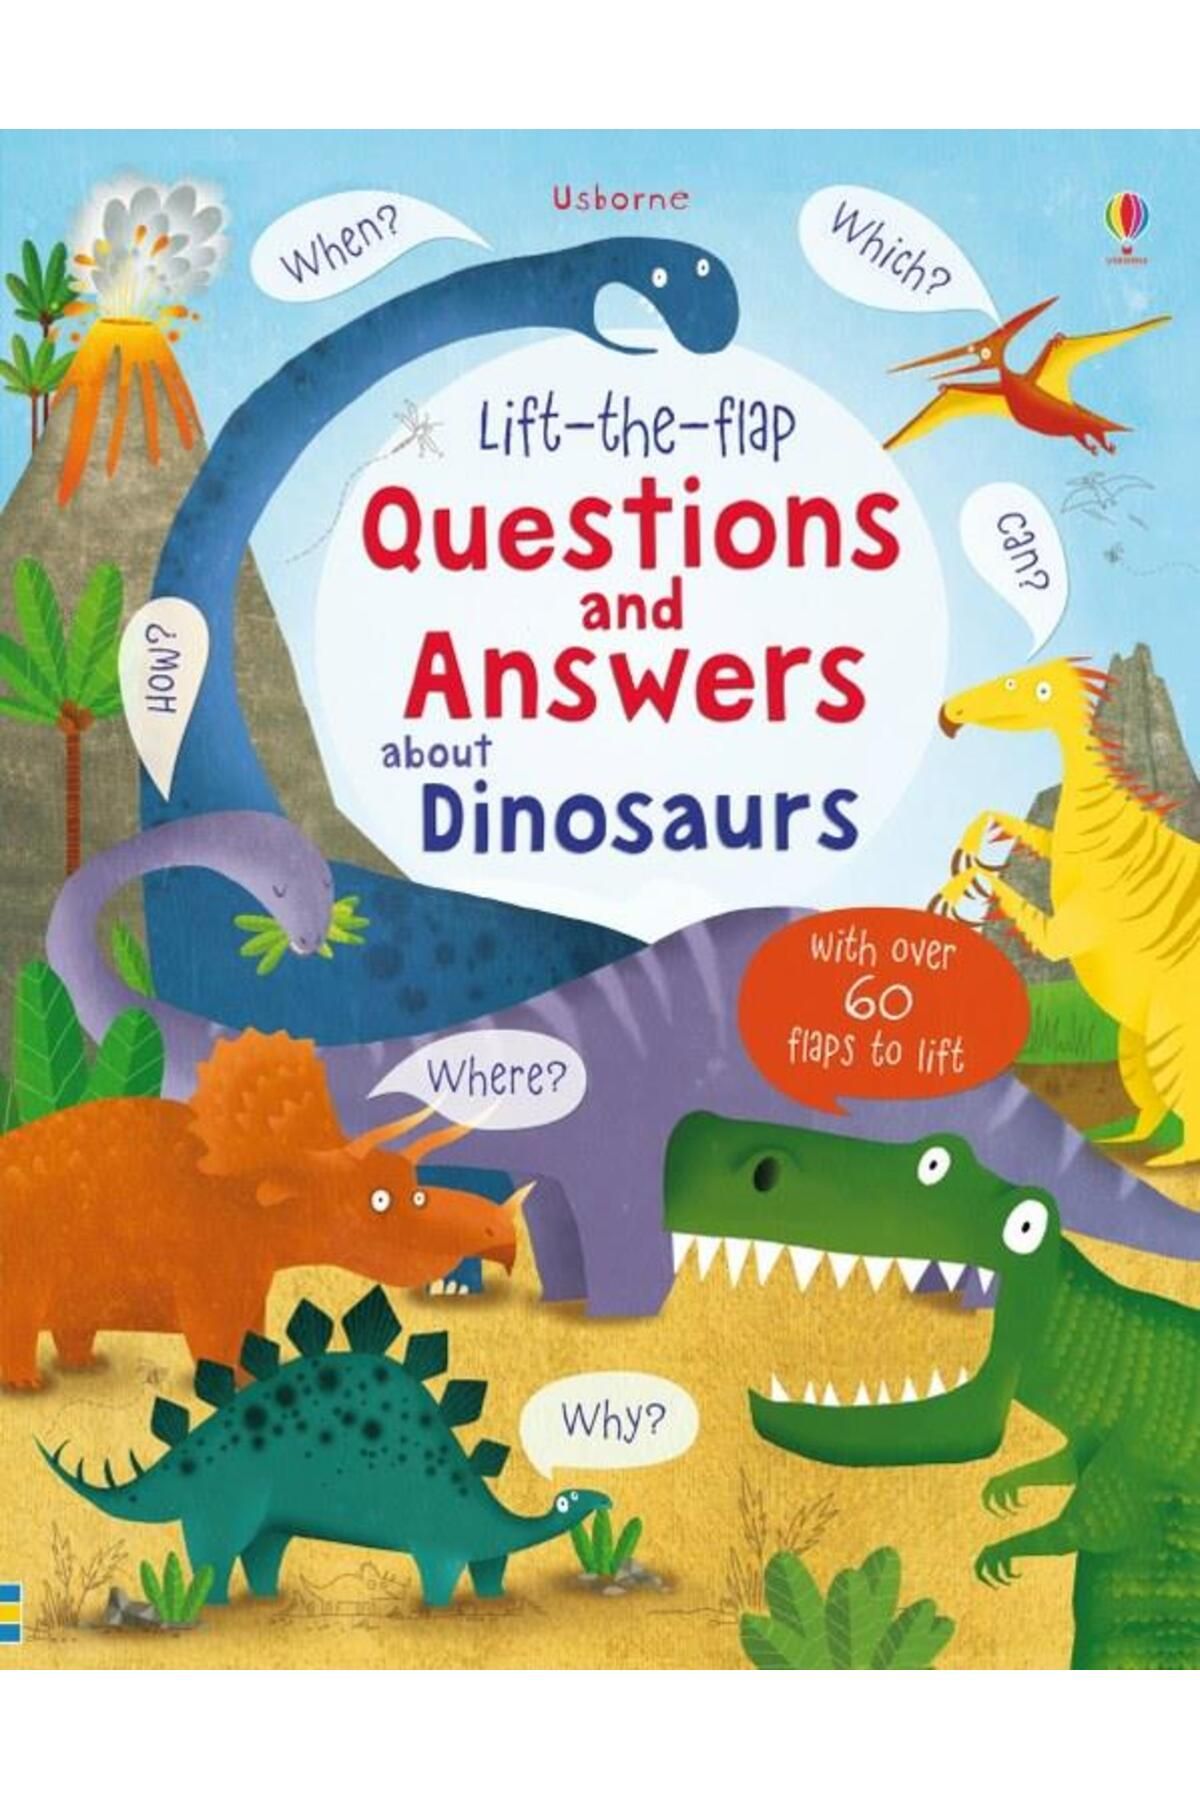 Usborne Questions & Answers: Dinosaurs